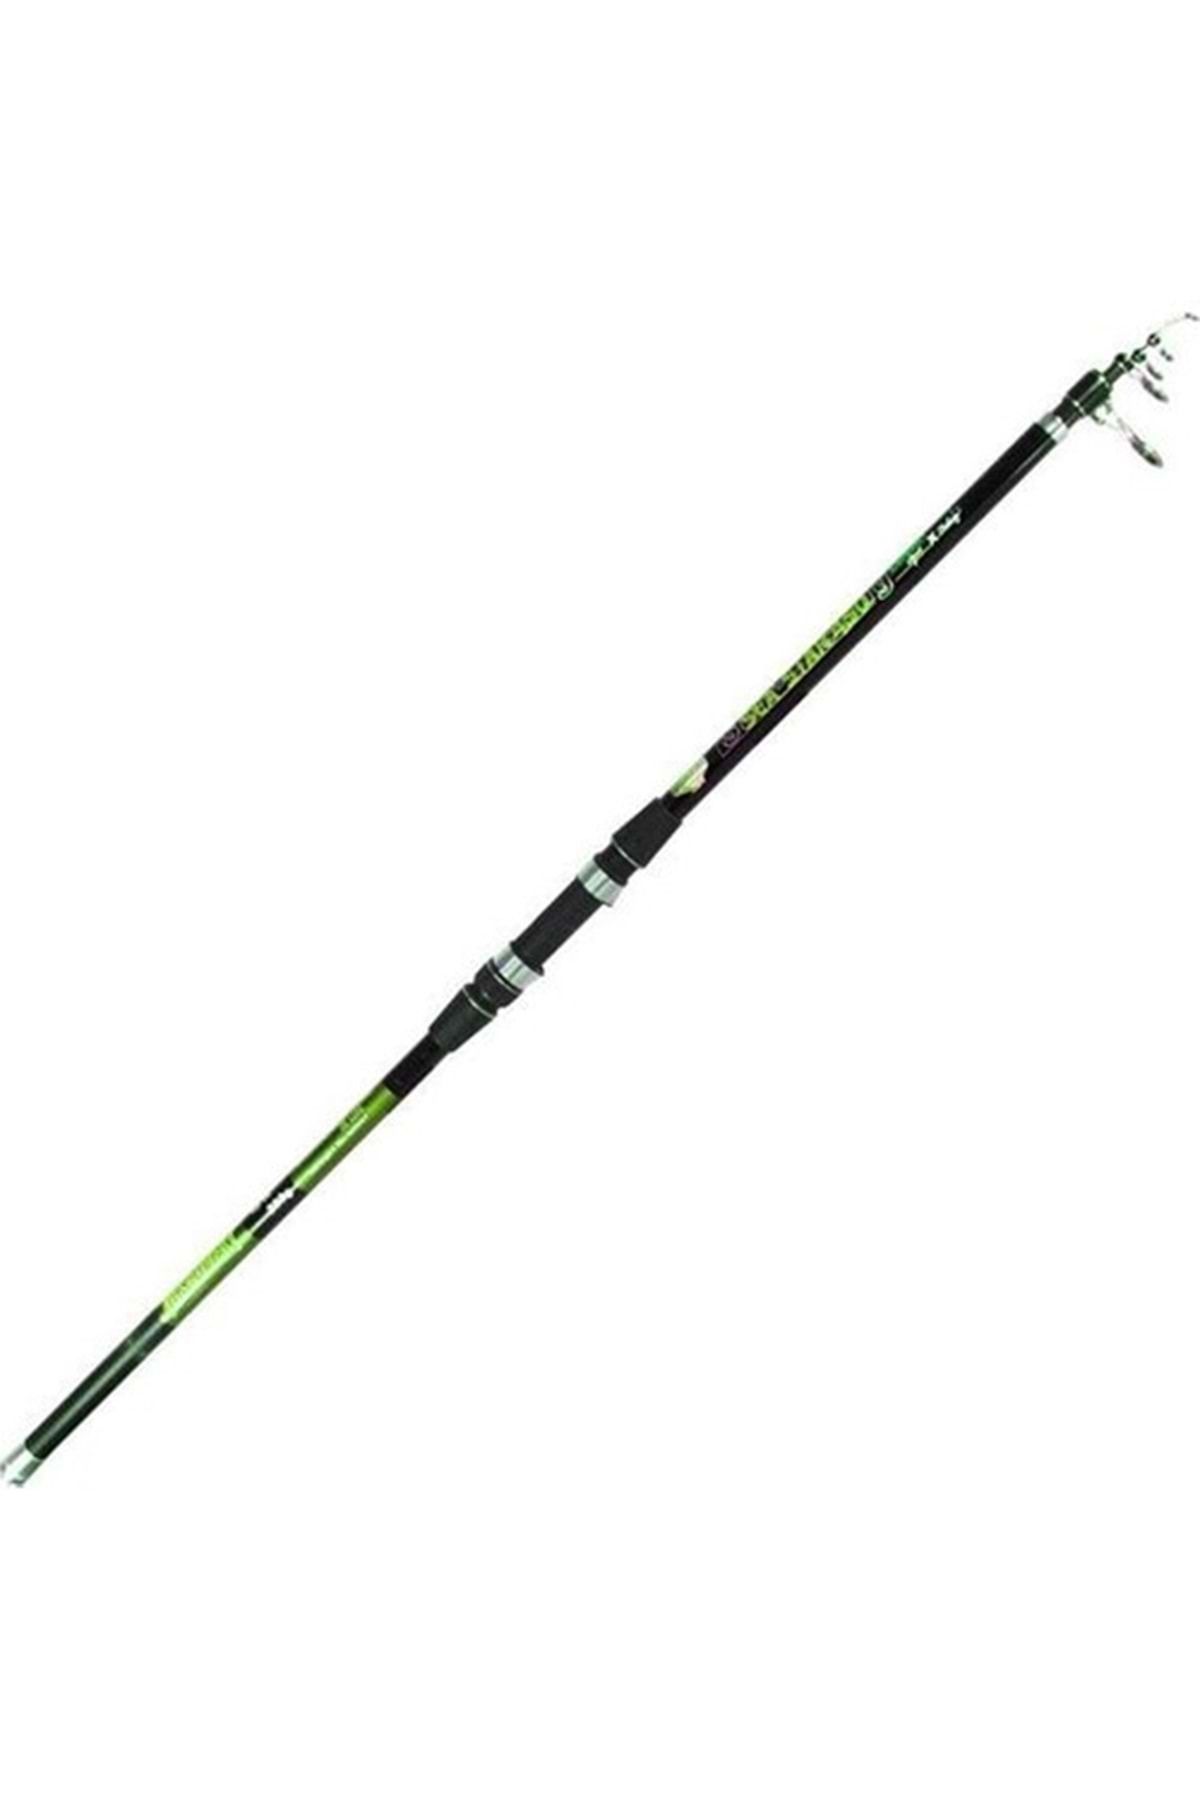 Discovery Sea Star 420cm Green 100-200gr 4 470 1ad.